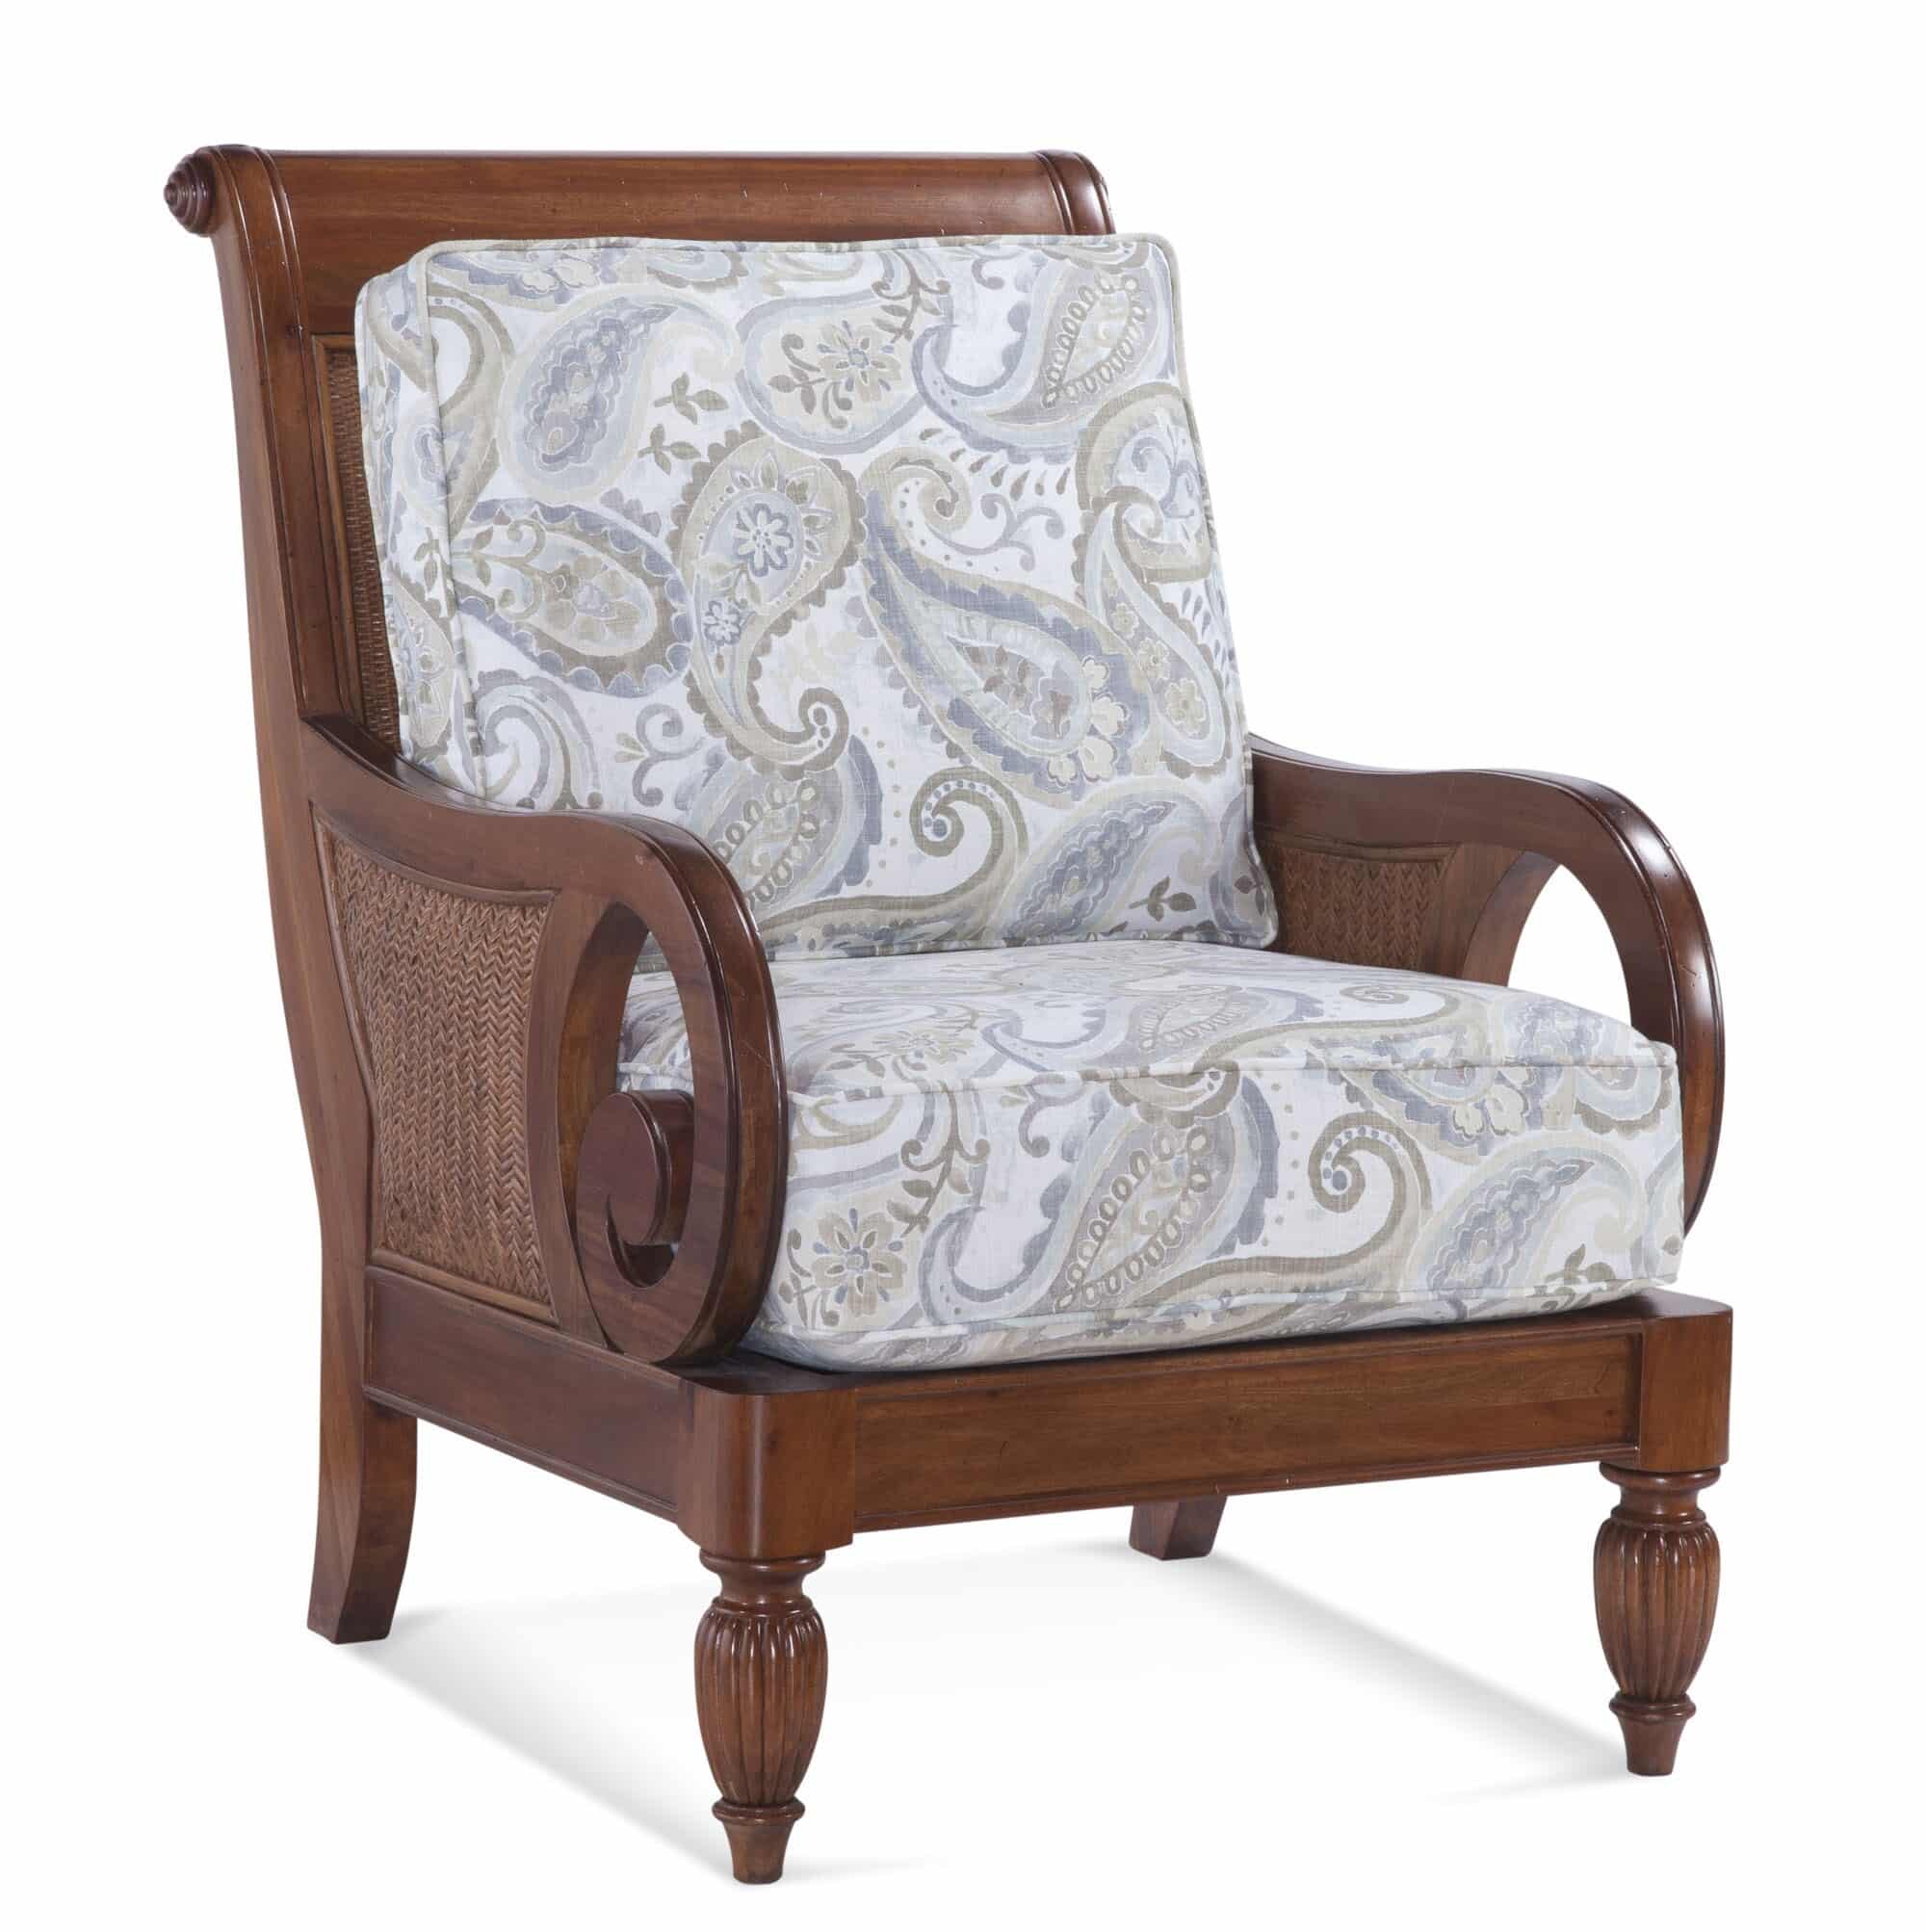 Grand View Solid Wood and Wicker Accent Chair Model 934-001 by Braxton Culler